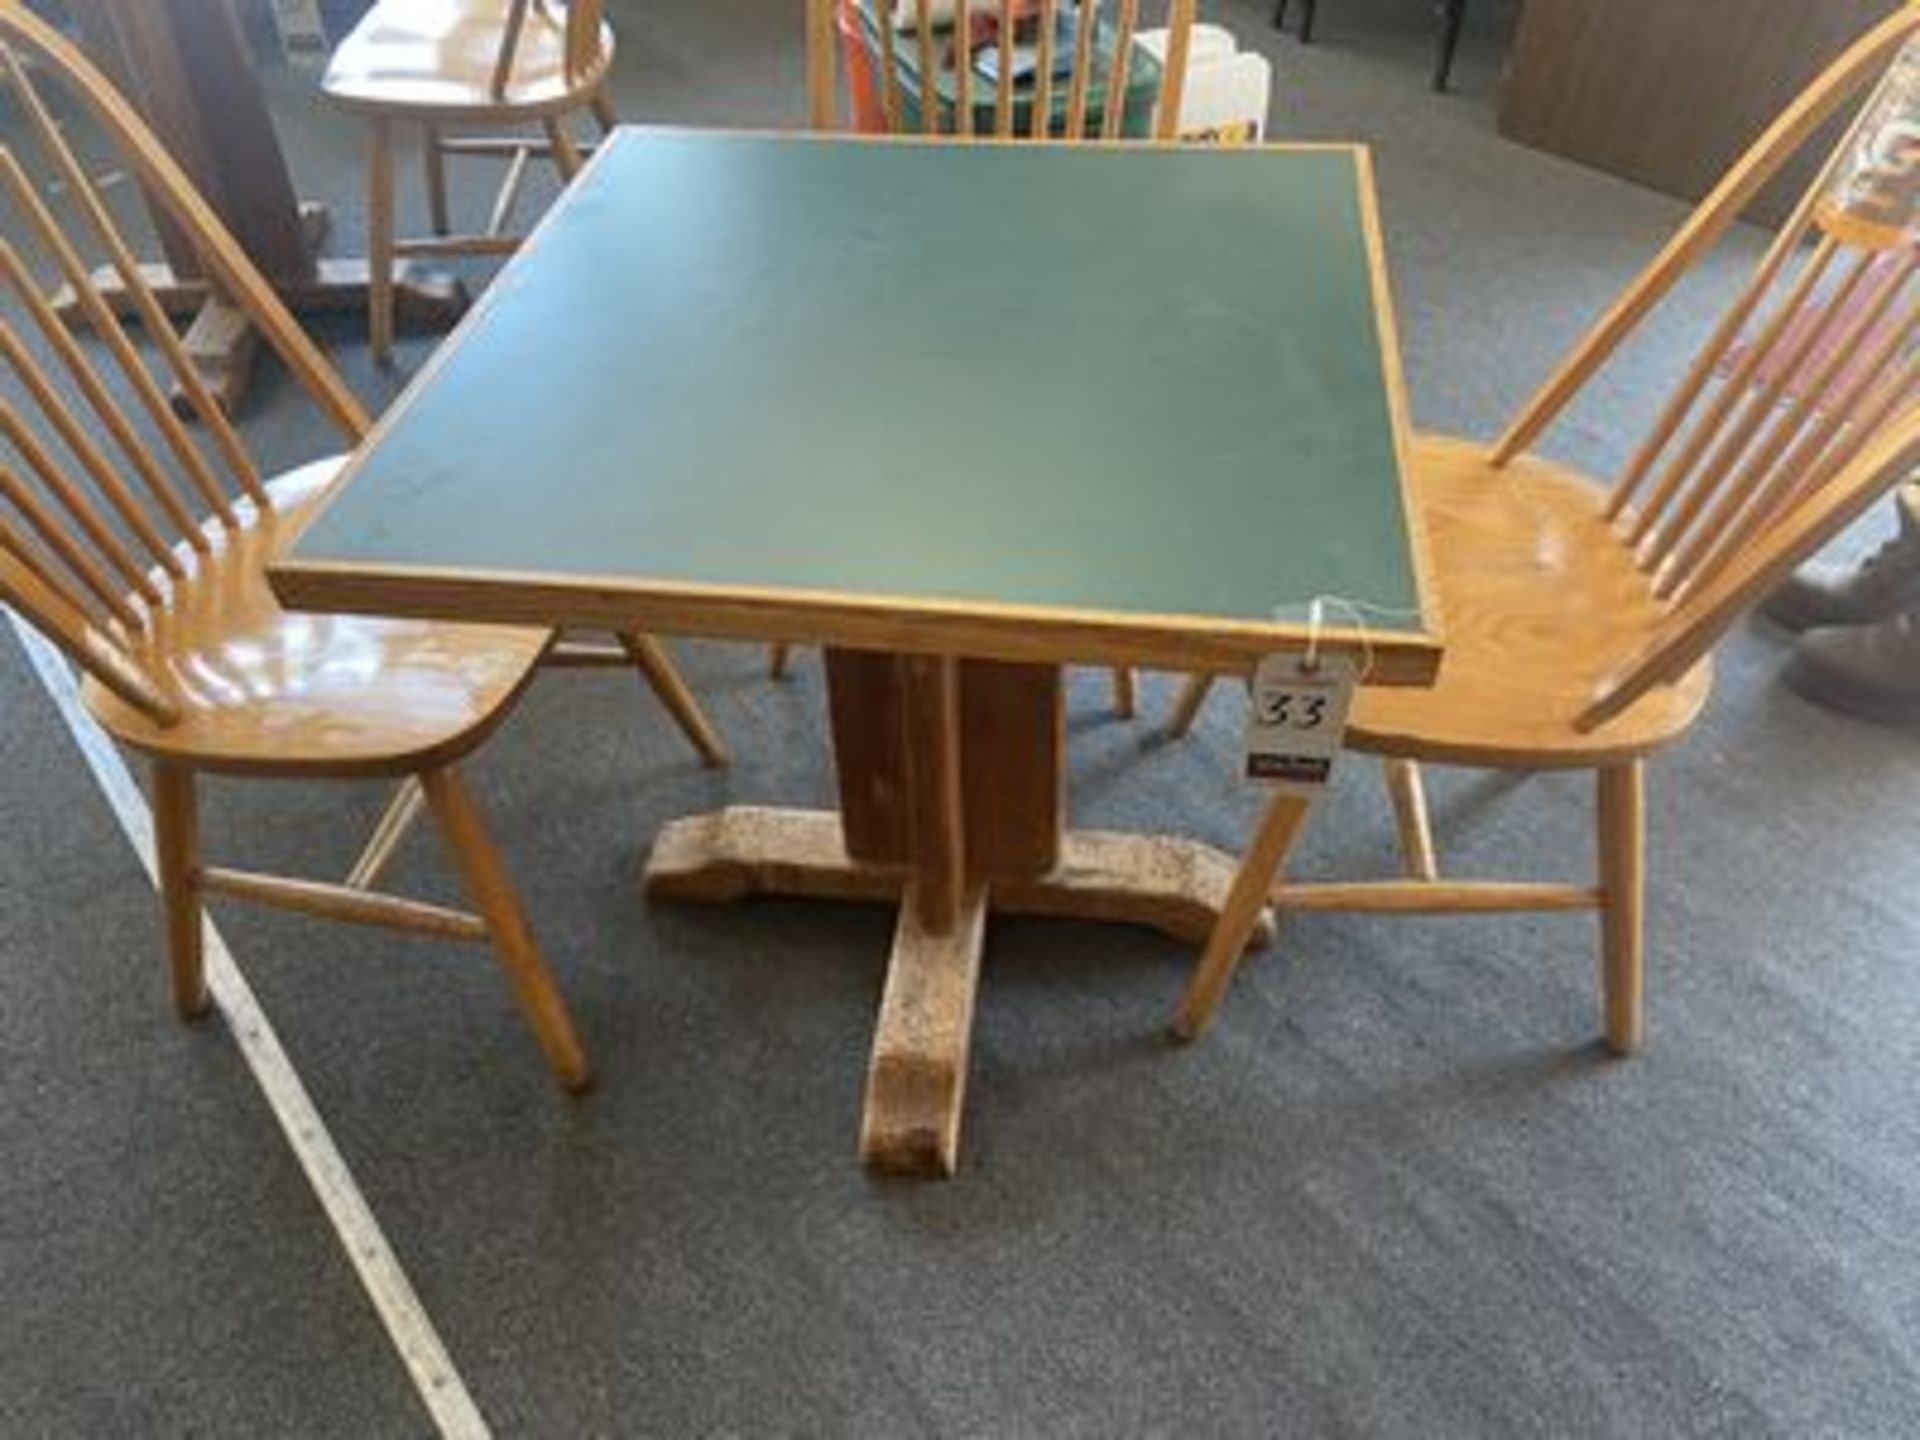 FORM. TOP 30"X30" S.P. TABLE